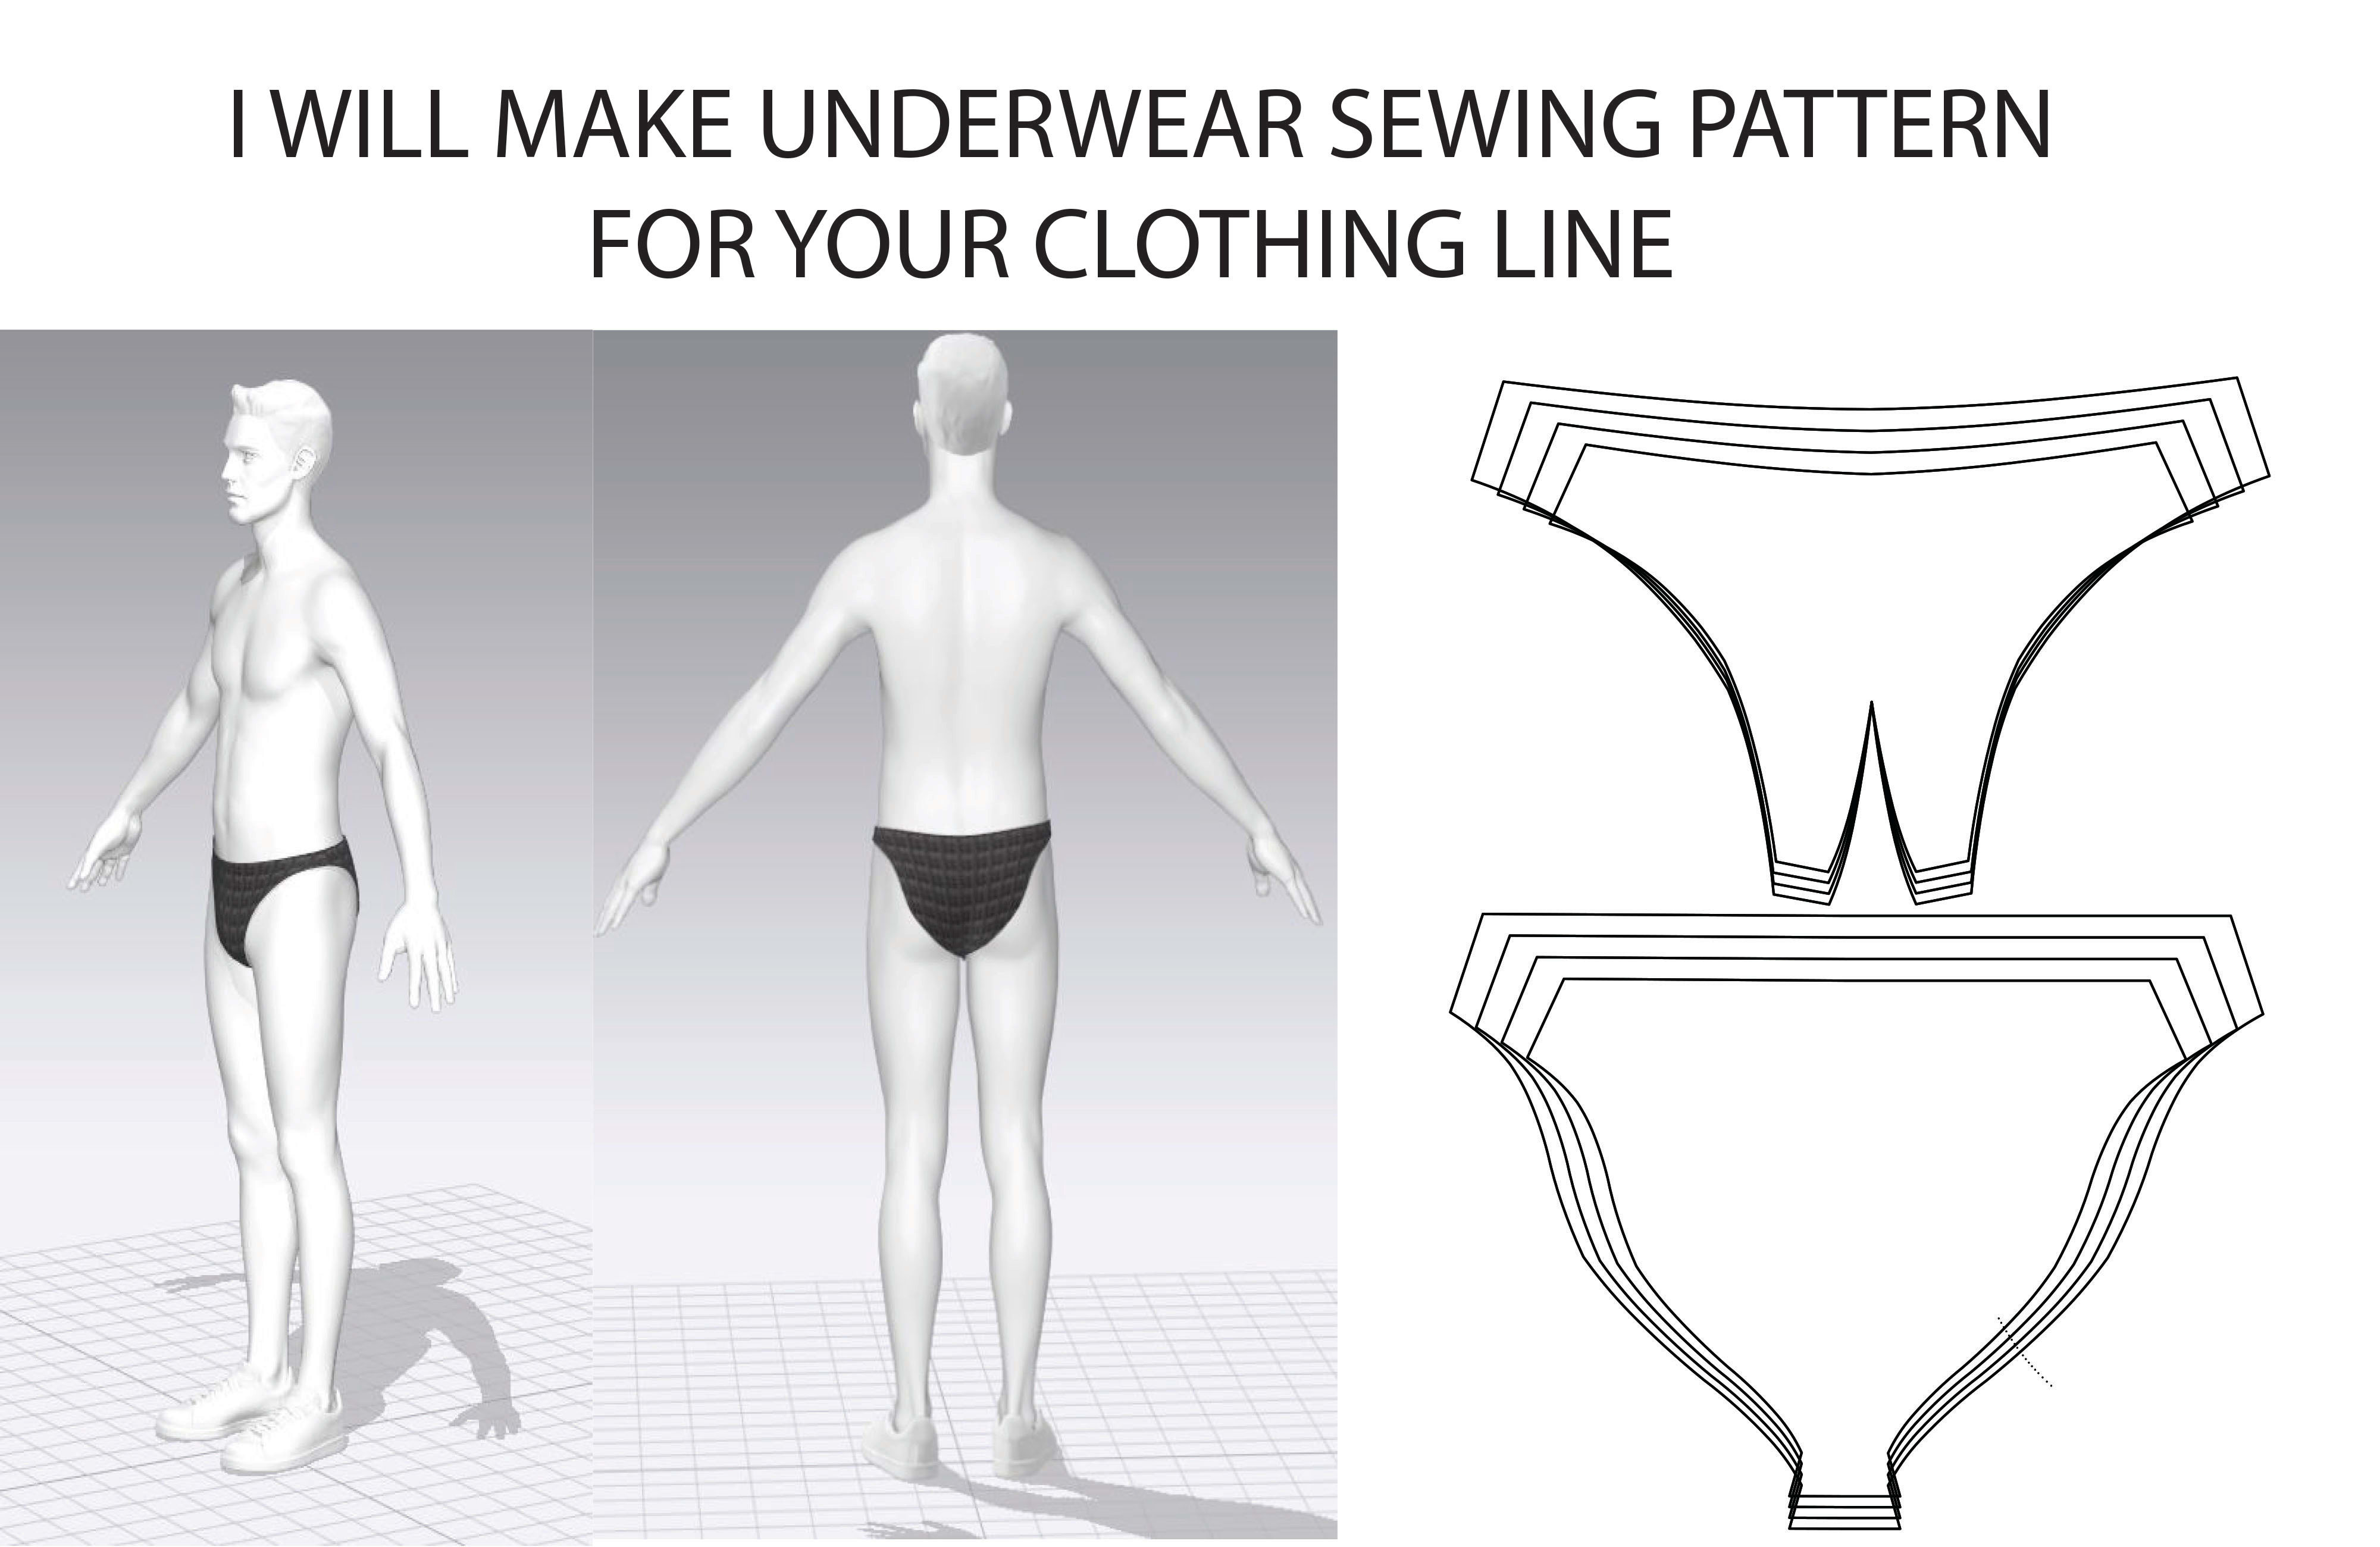 Make underwear sewing pattern for your clothing line by Pattern_maker01